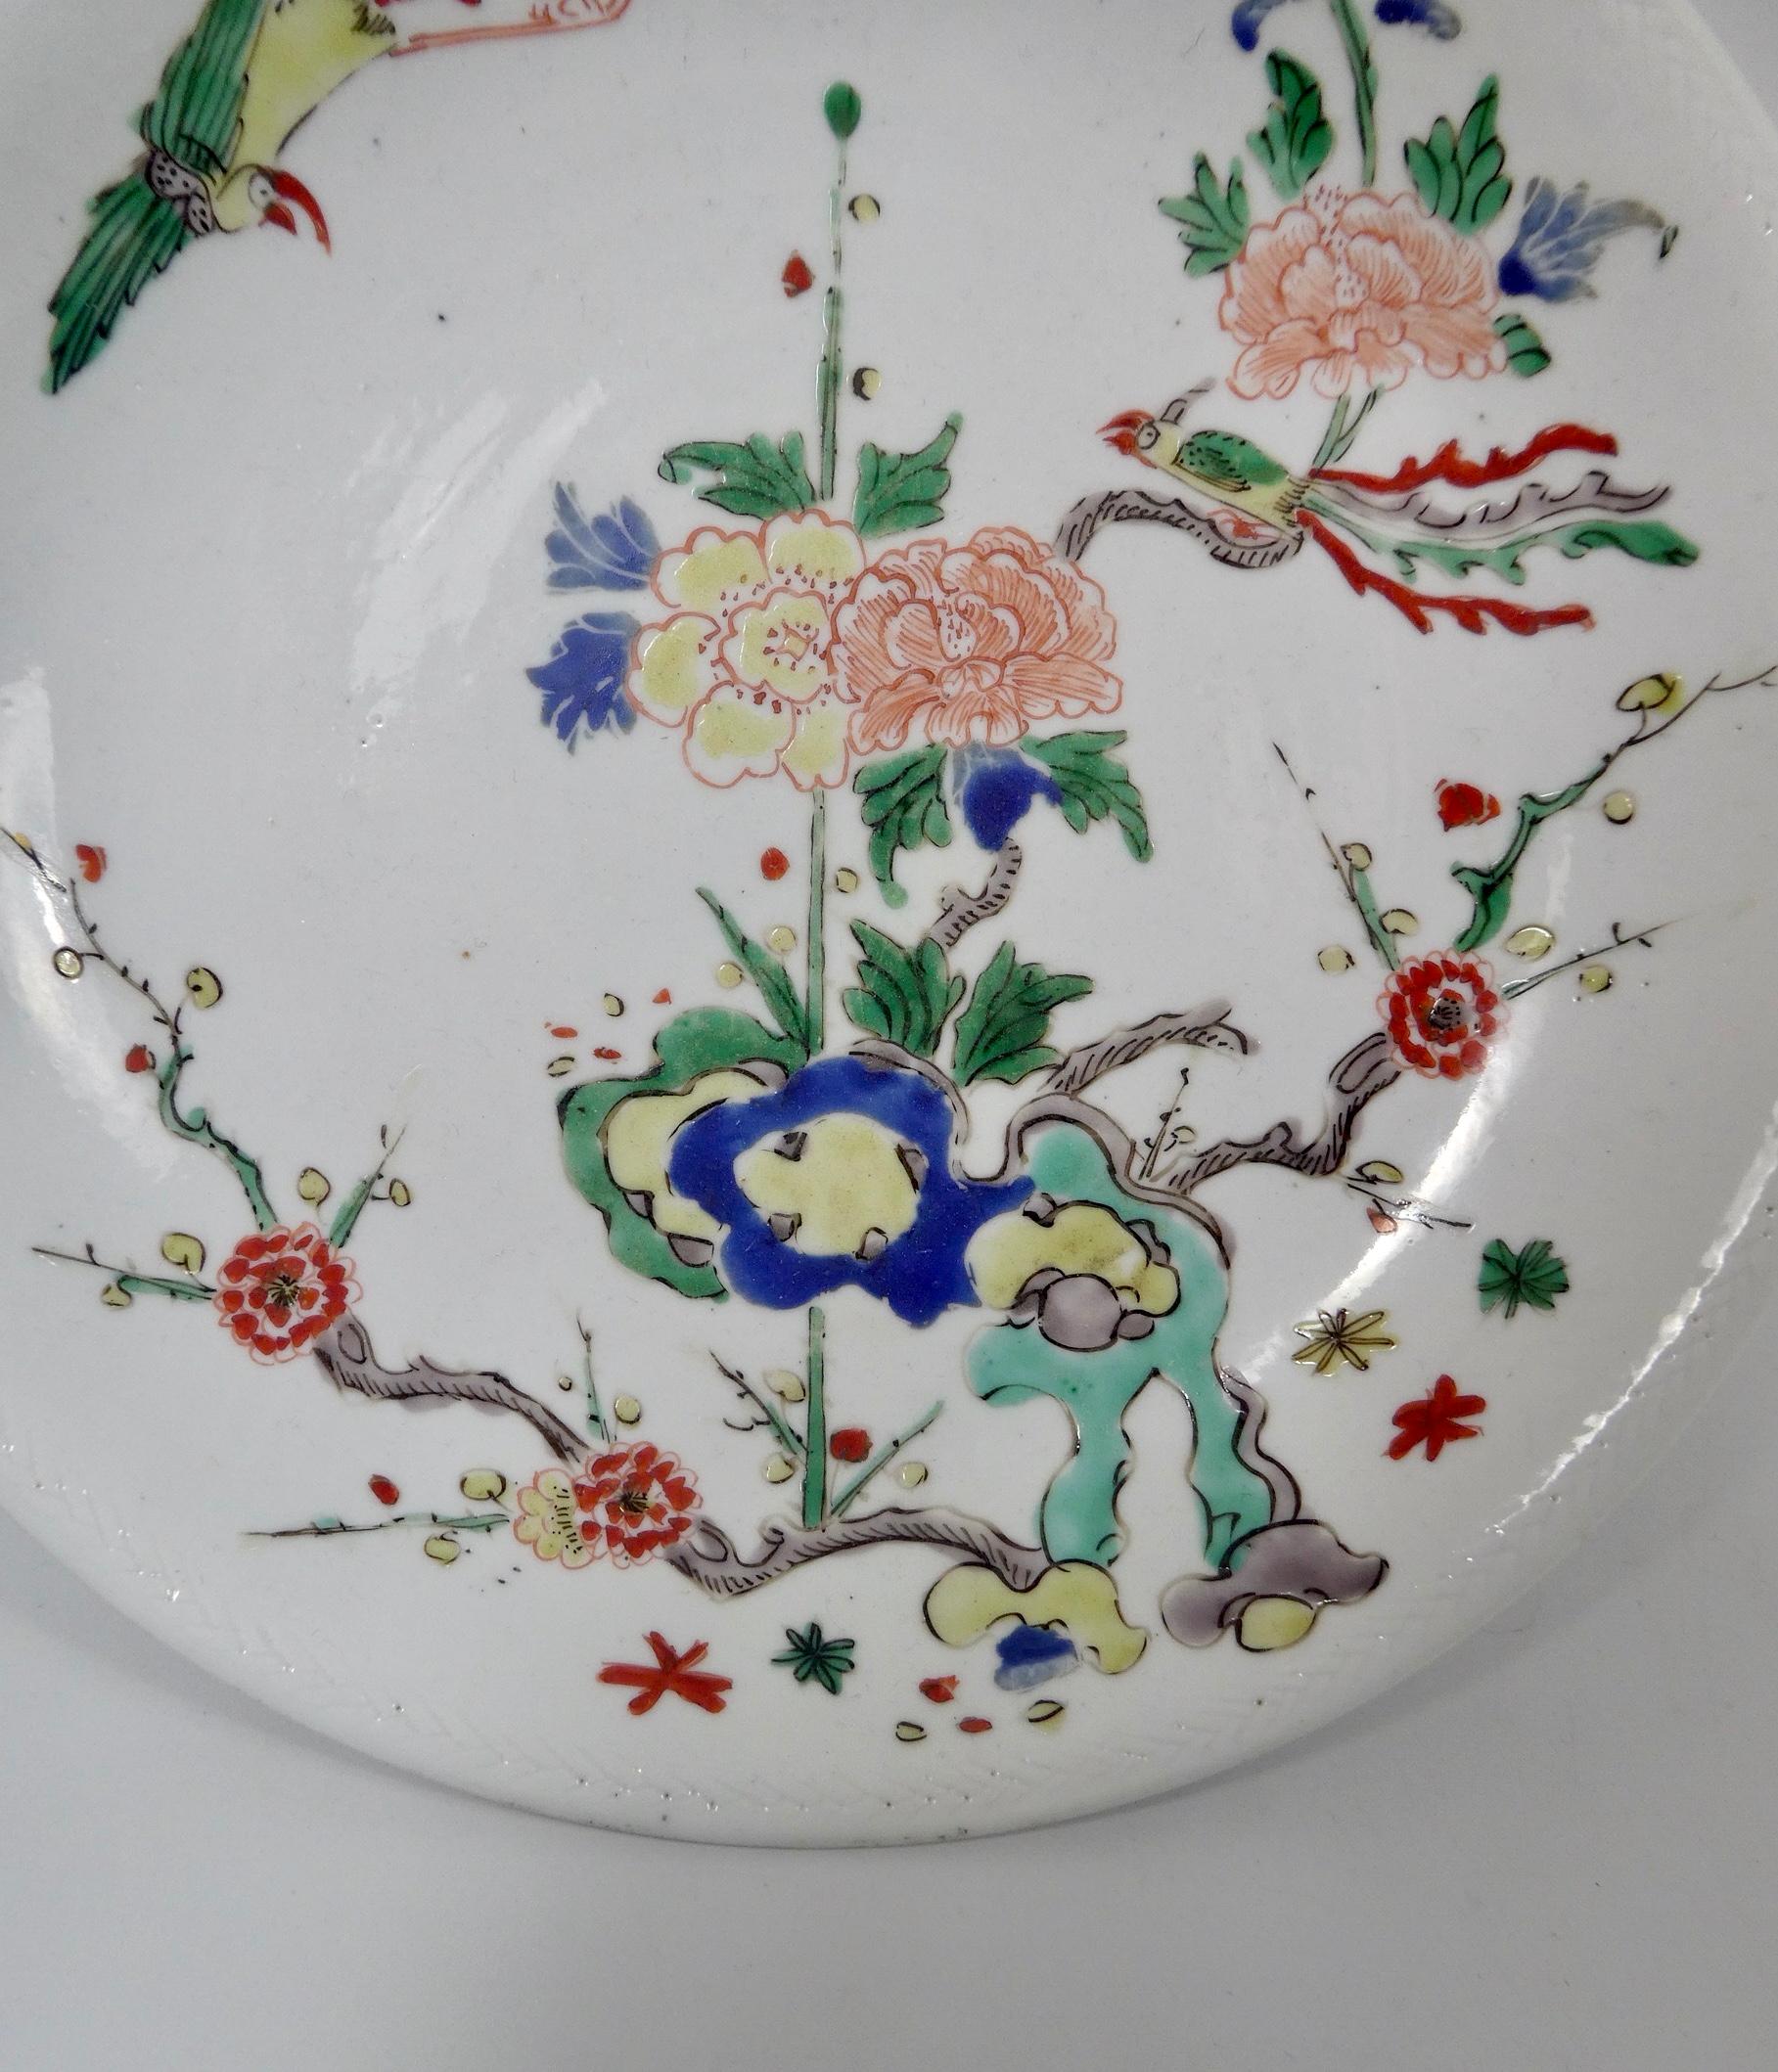 A rare Chinese porcelain dish, Shunzhi period, 1644-1661. Hand painted in wucai enamels, with a scene of exotic birds amongst flowering plants, emerging from rocks. Within an anhua moulded narrow border.
Measures: Diameter 22.5 cm, 8